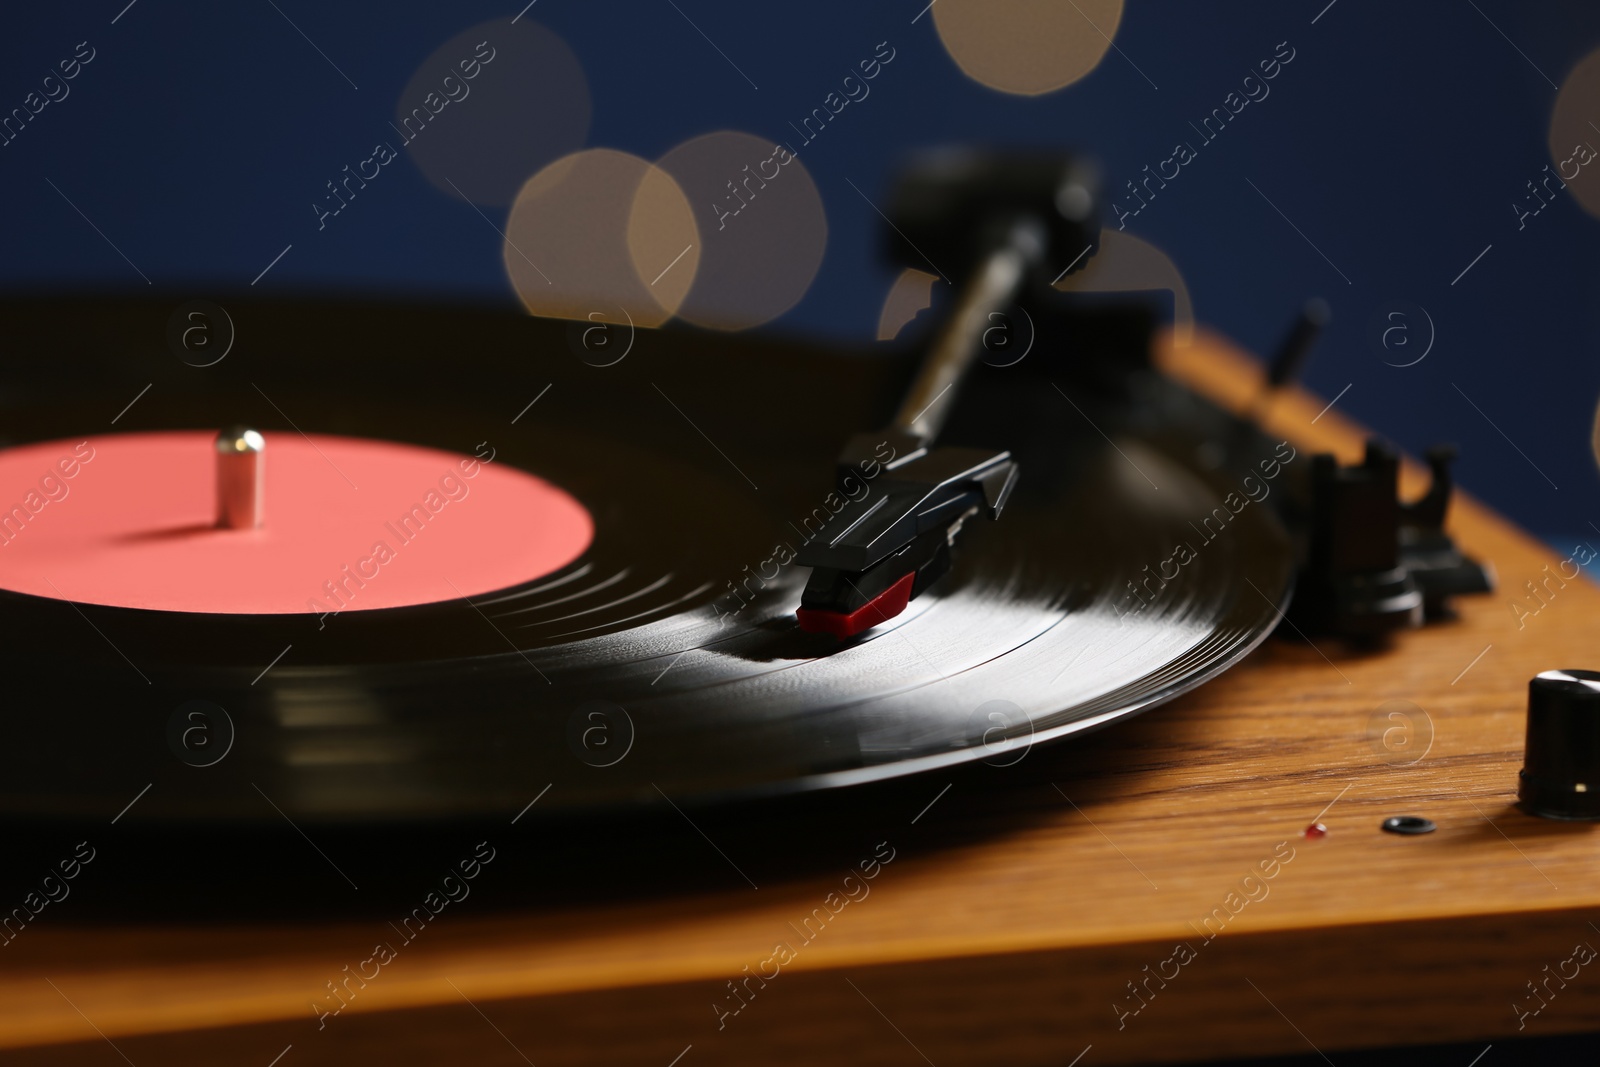 Photo of Vinyl record on turntable against blurred lights, closeup